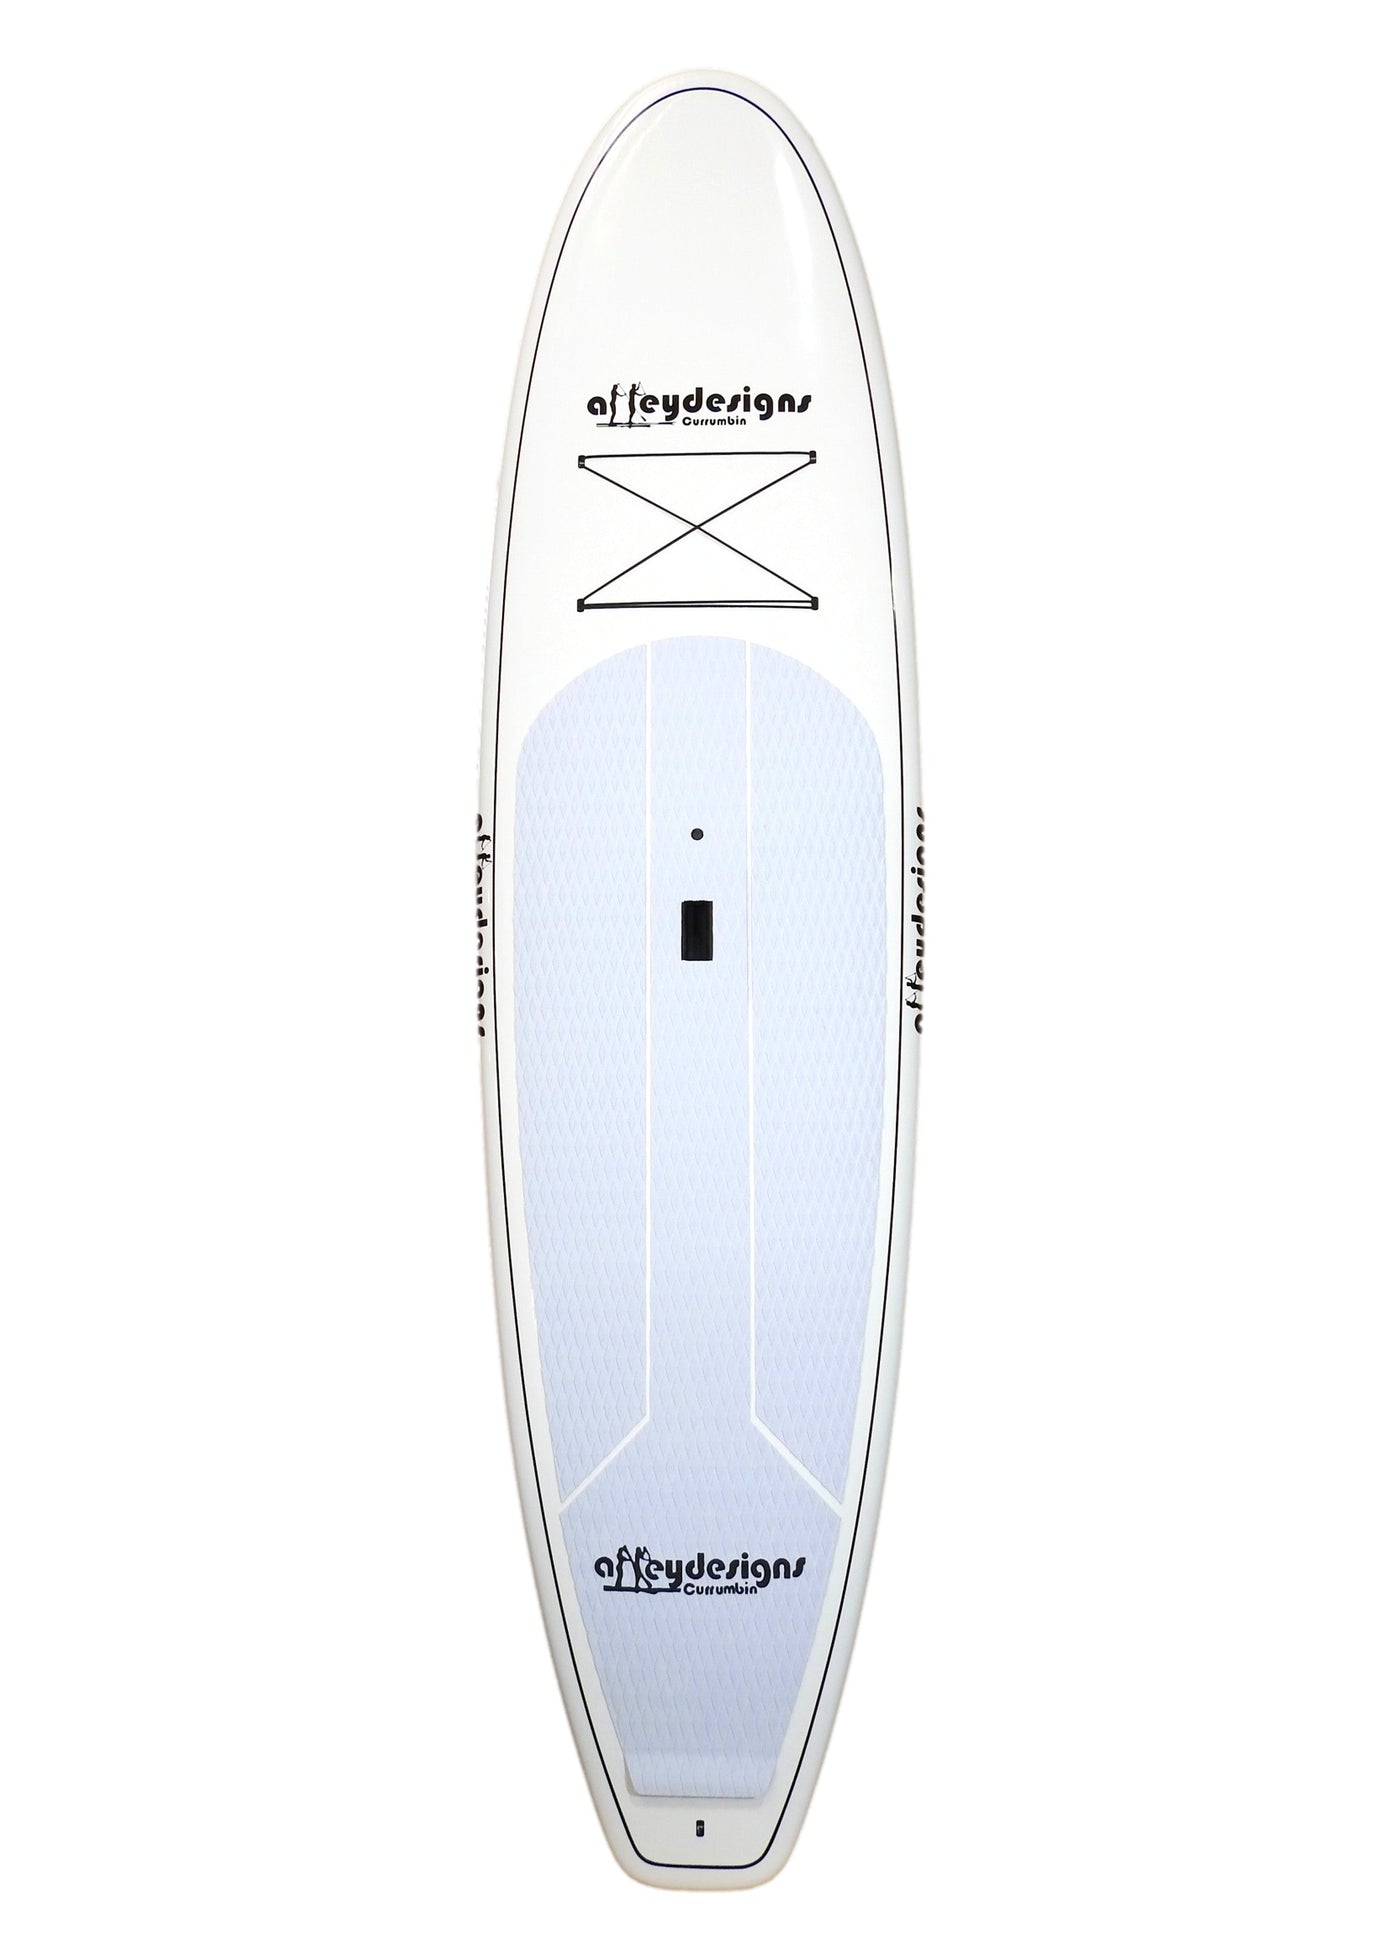 10'6" x 32" White Classic Alleydesigns Family SUP 200L - Alleydesigns  Pty Ltd                                             ABN: 44165571264